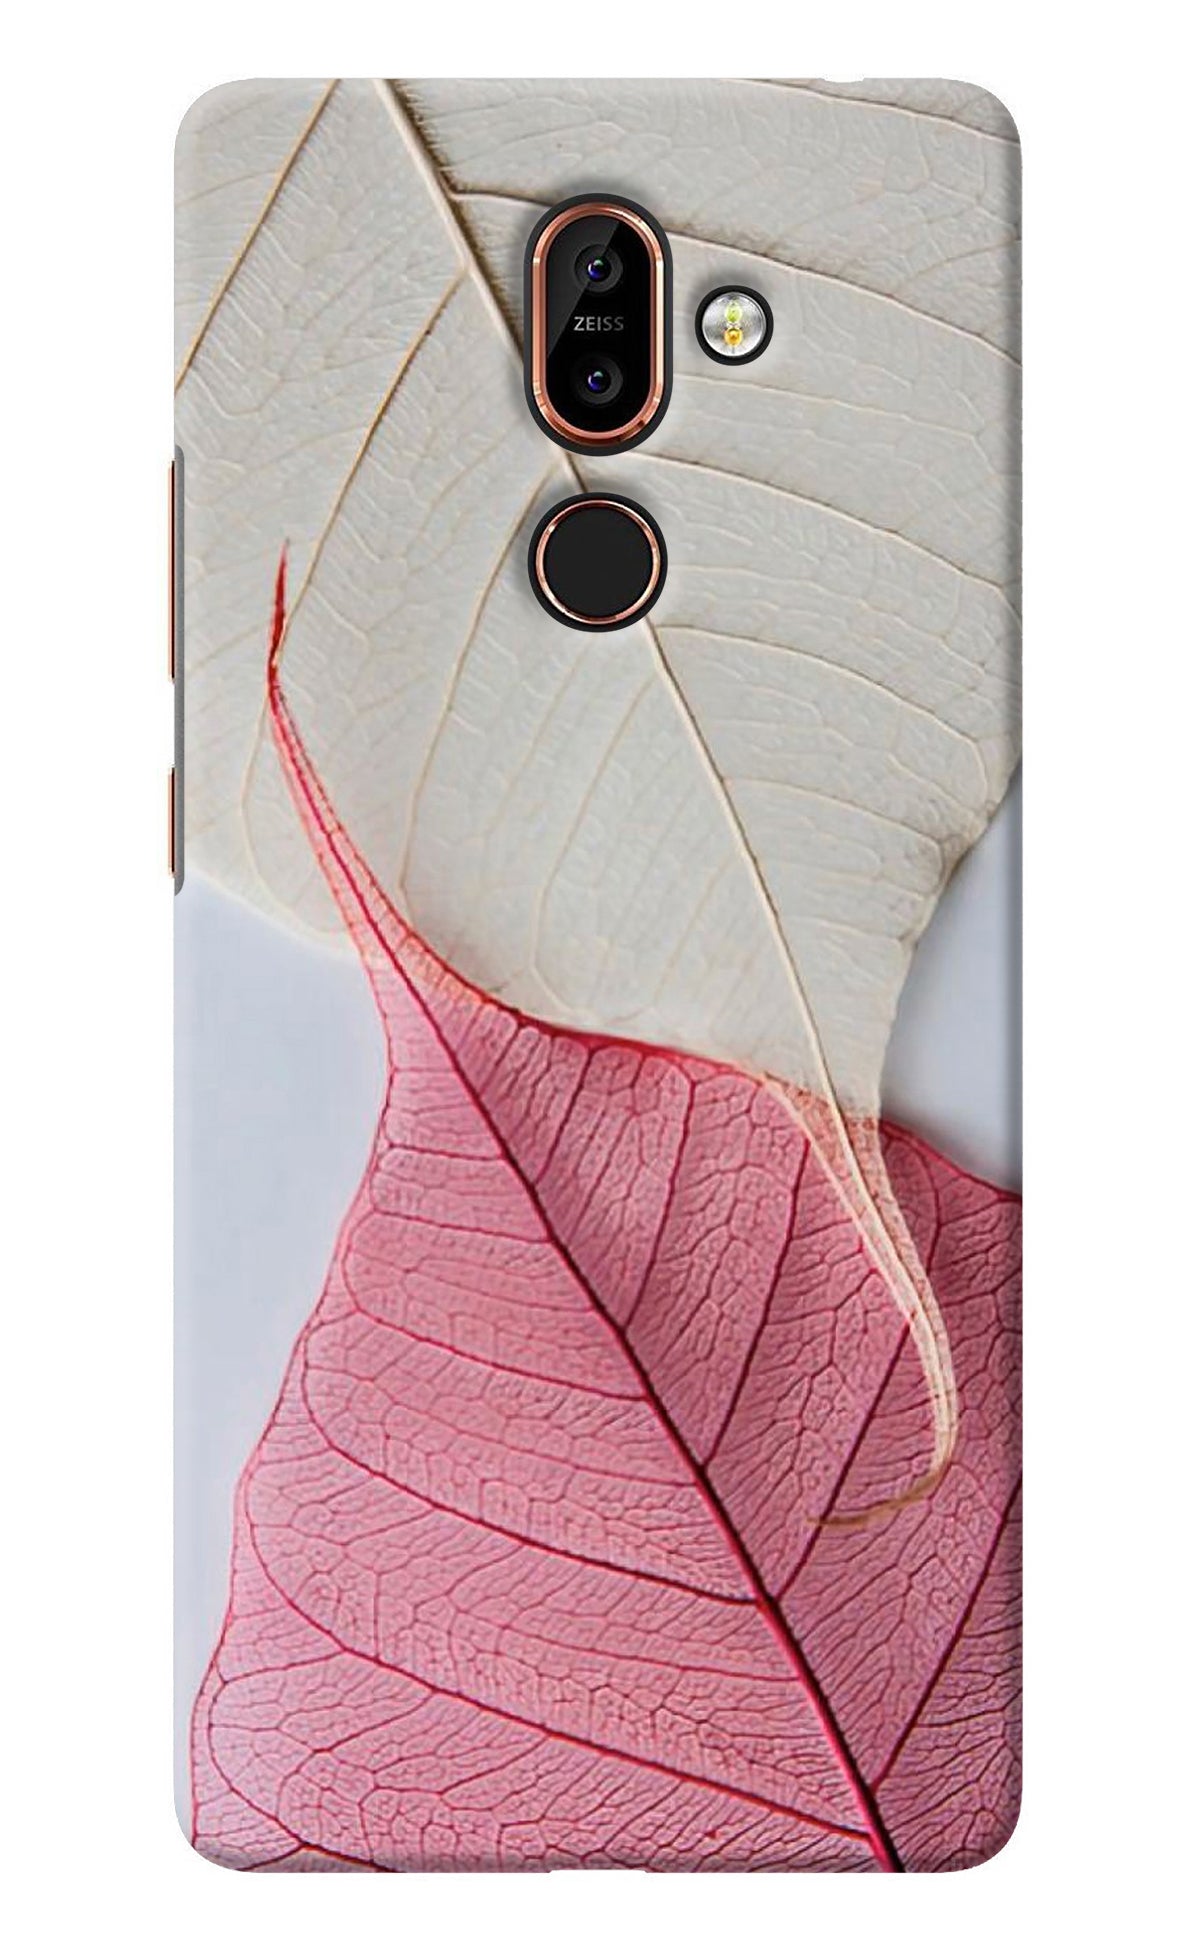 White Pink Leaf Nokia 7 Plus Back Cover